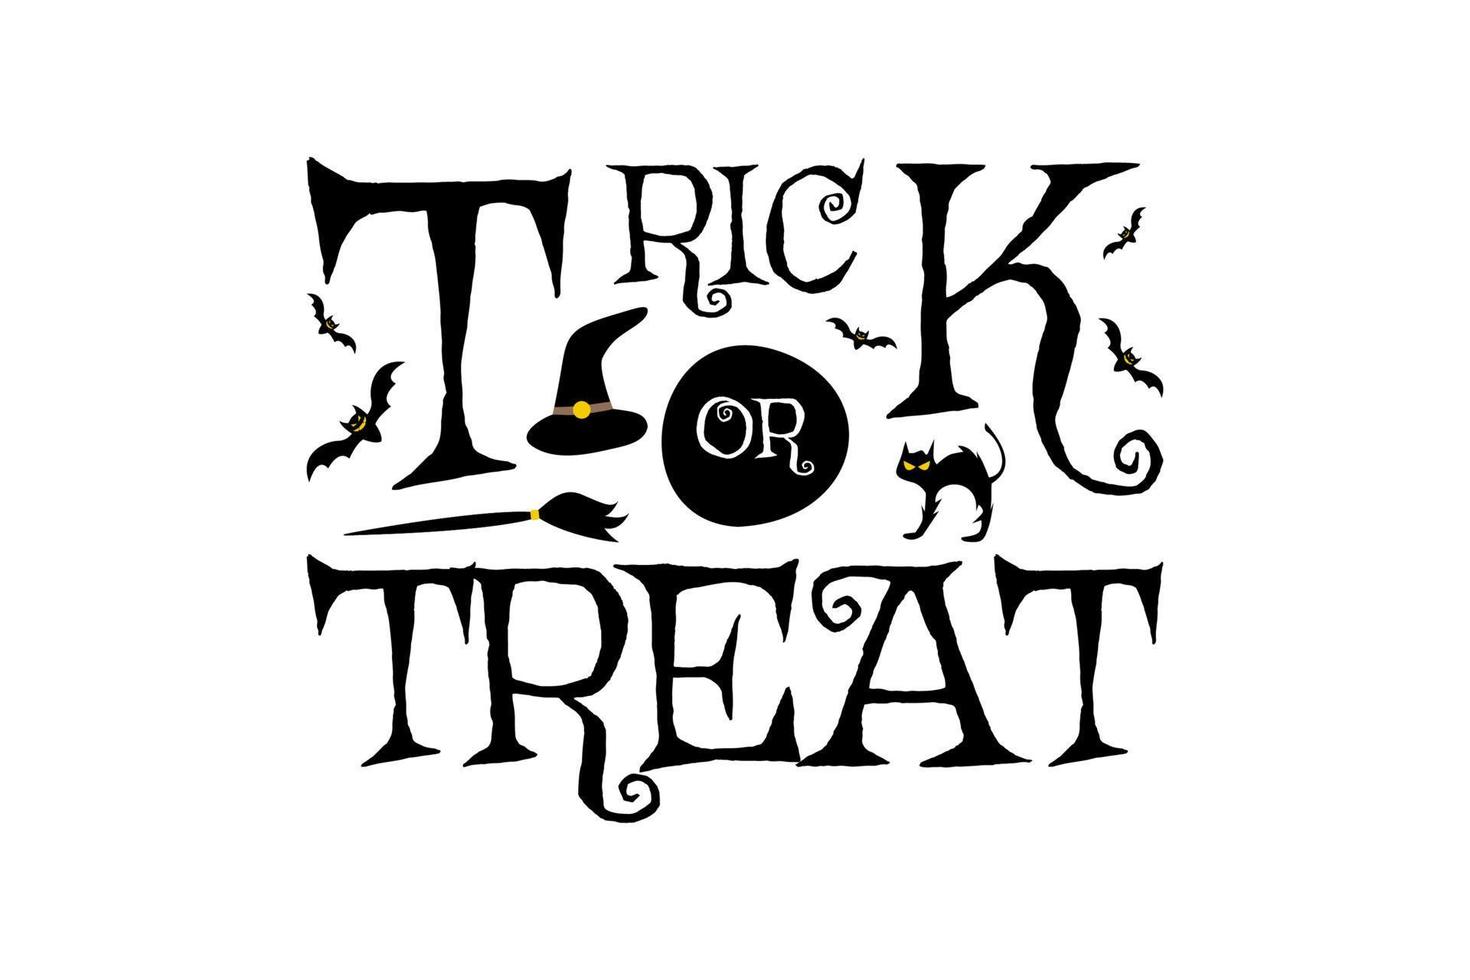 Trick or treat halloween party event night celebration horror illustration. vector